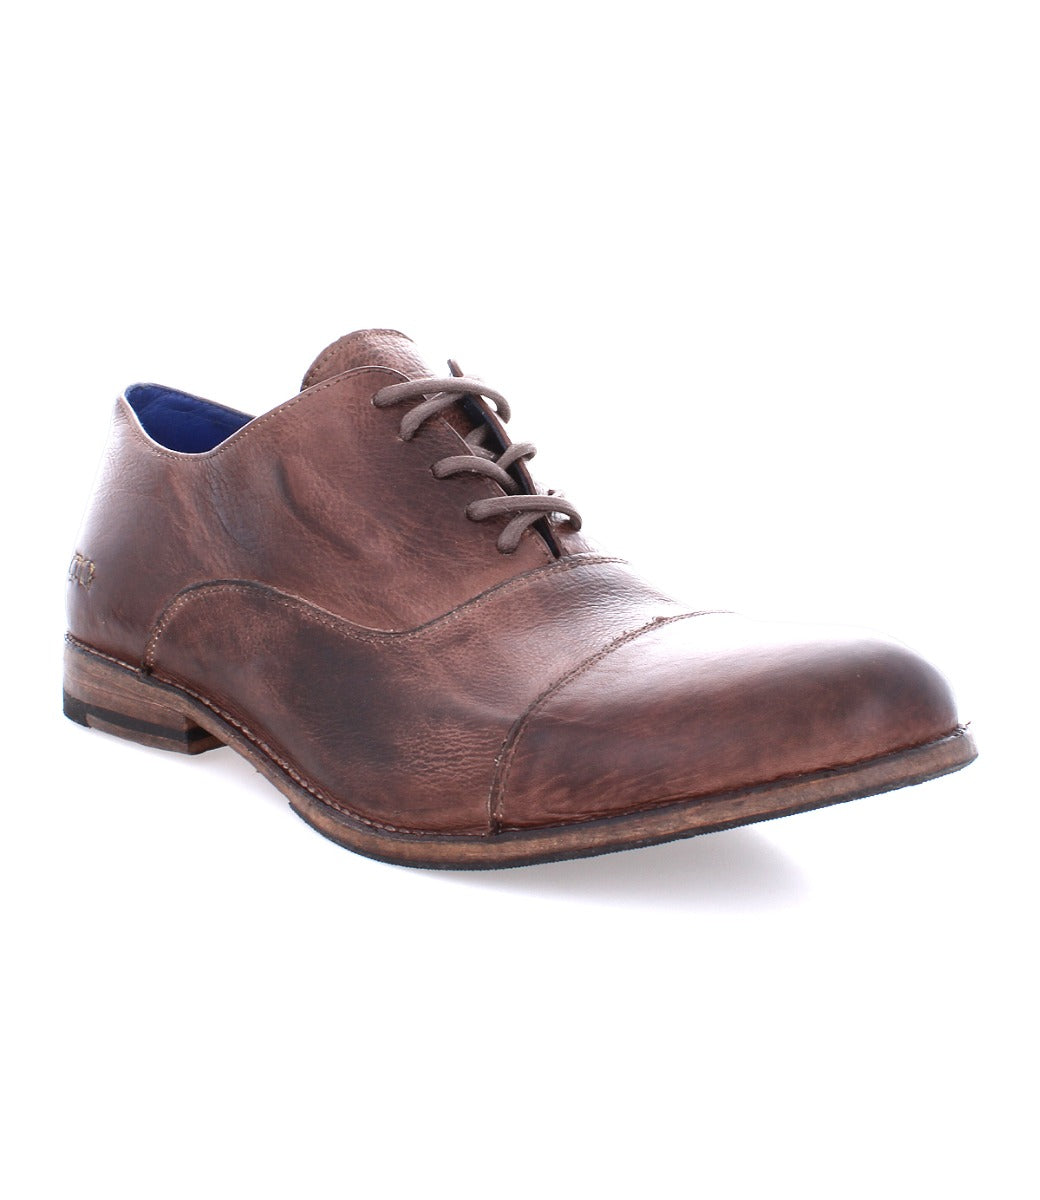 A men's brown lace up Thorn oxford shoe by Bed Stu.